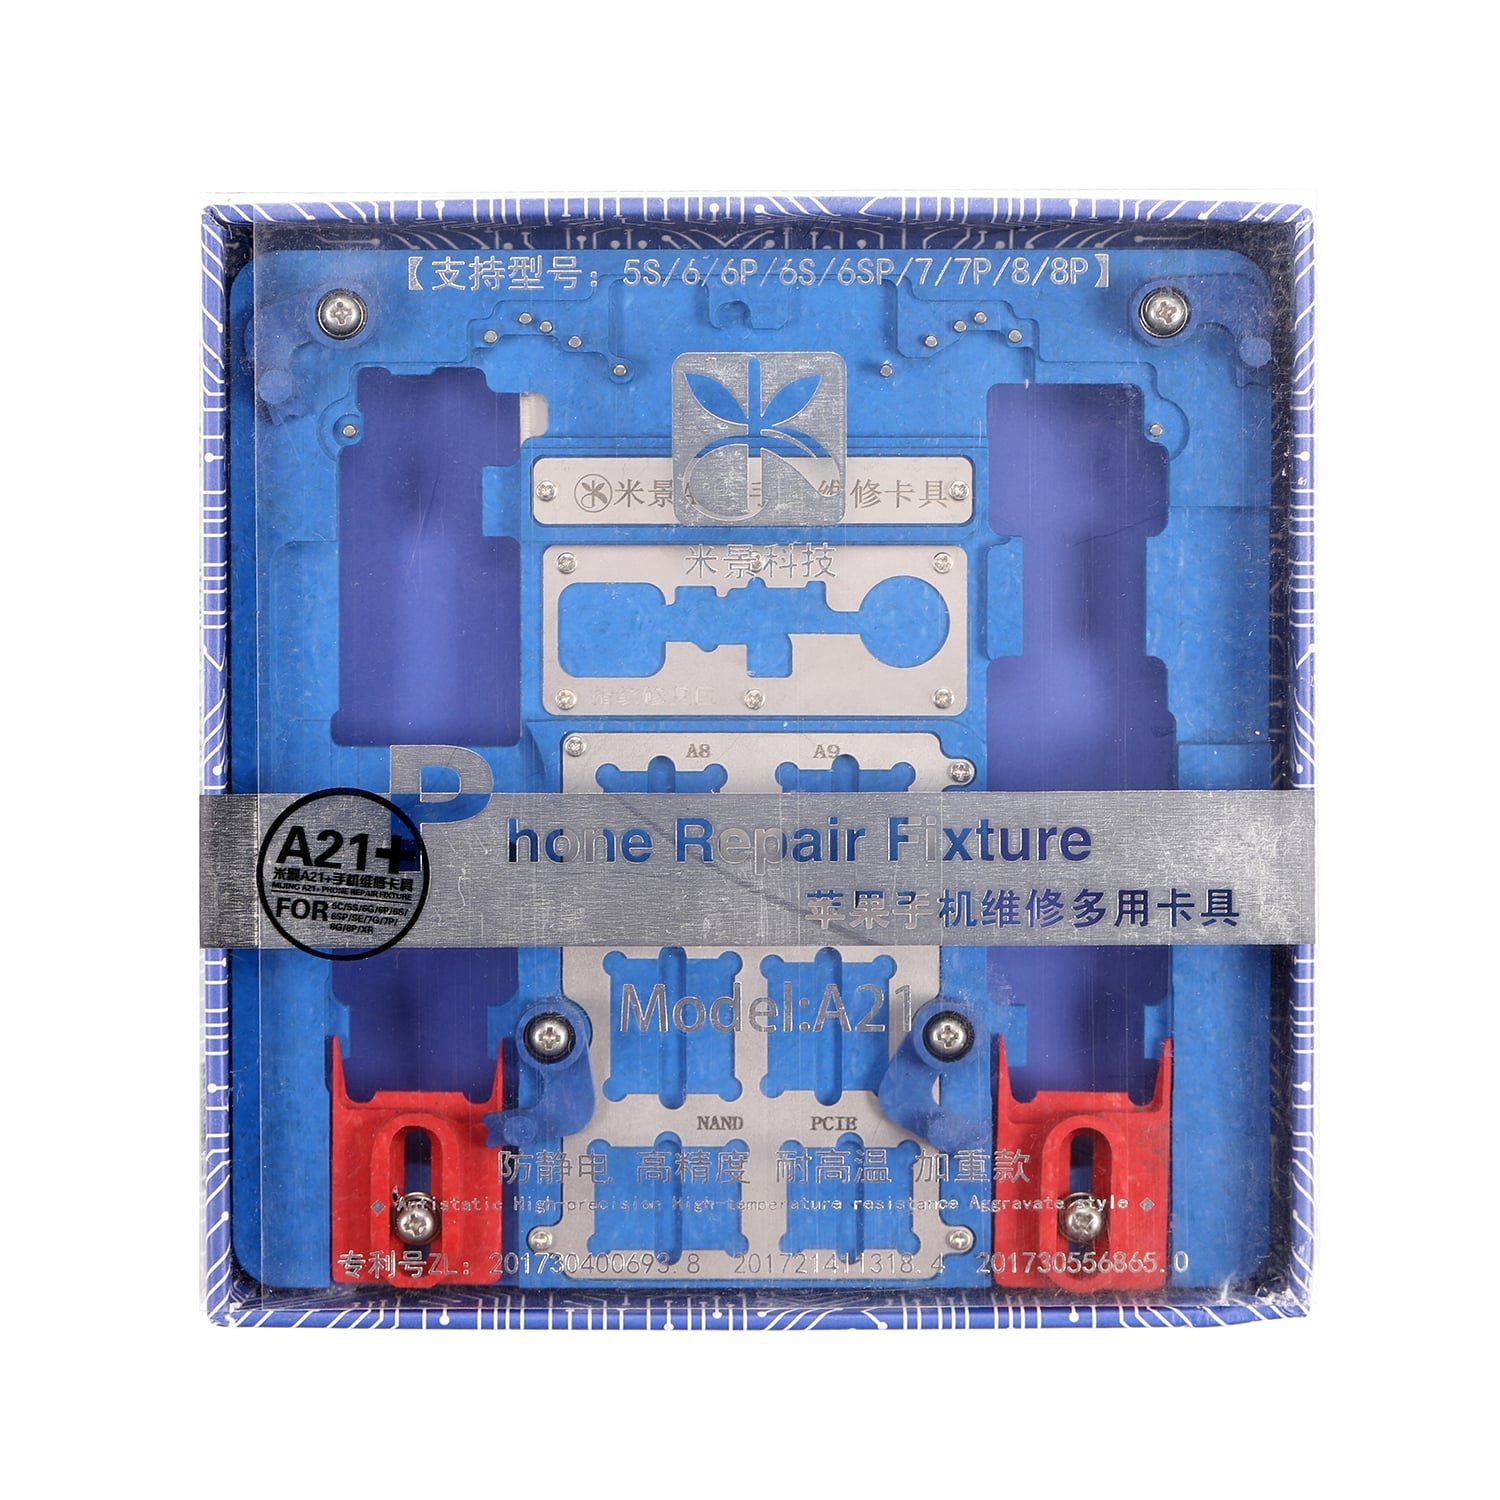 MIJING A21+ MOBILE PHONE MULTIFUNCTIONAL PCB HOLDER FOR IPHONE 5S/6G/6P/6SP/7G/7P/8/8P/XR